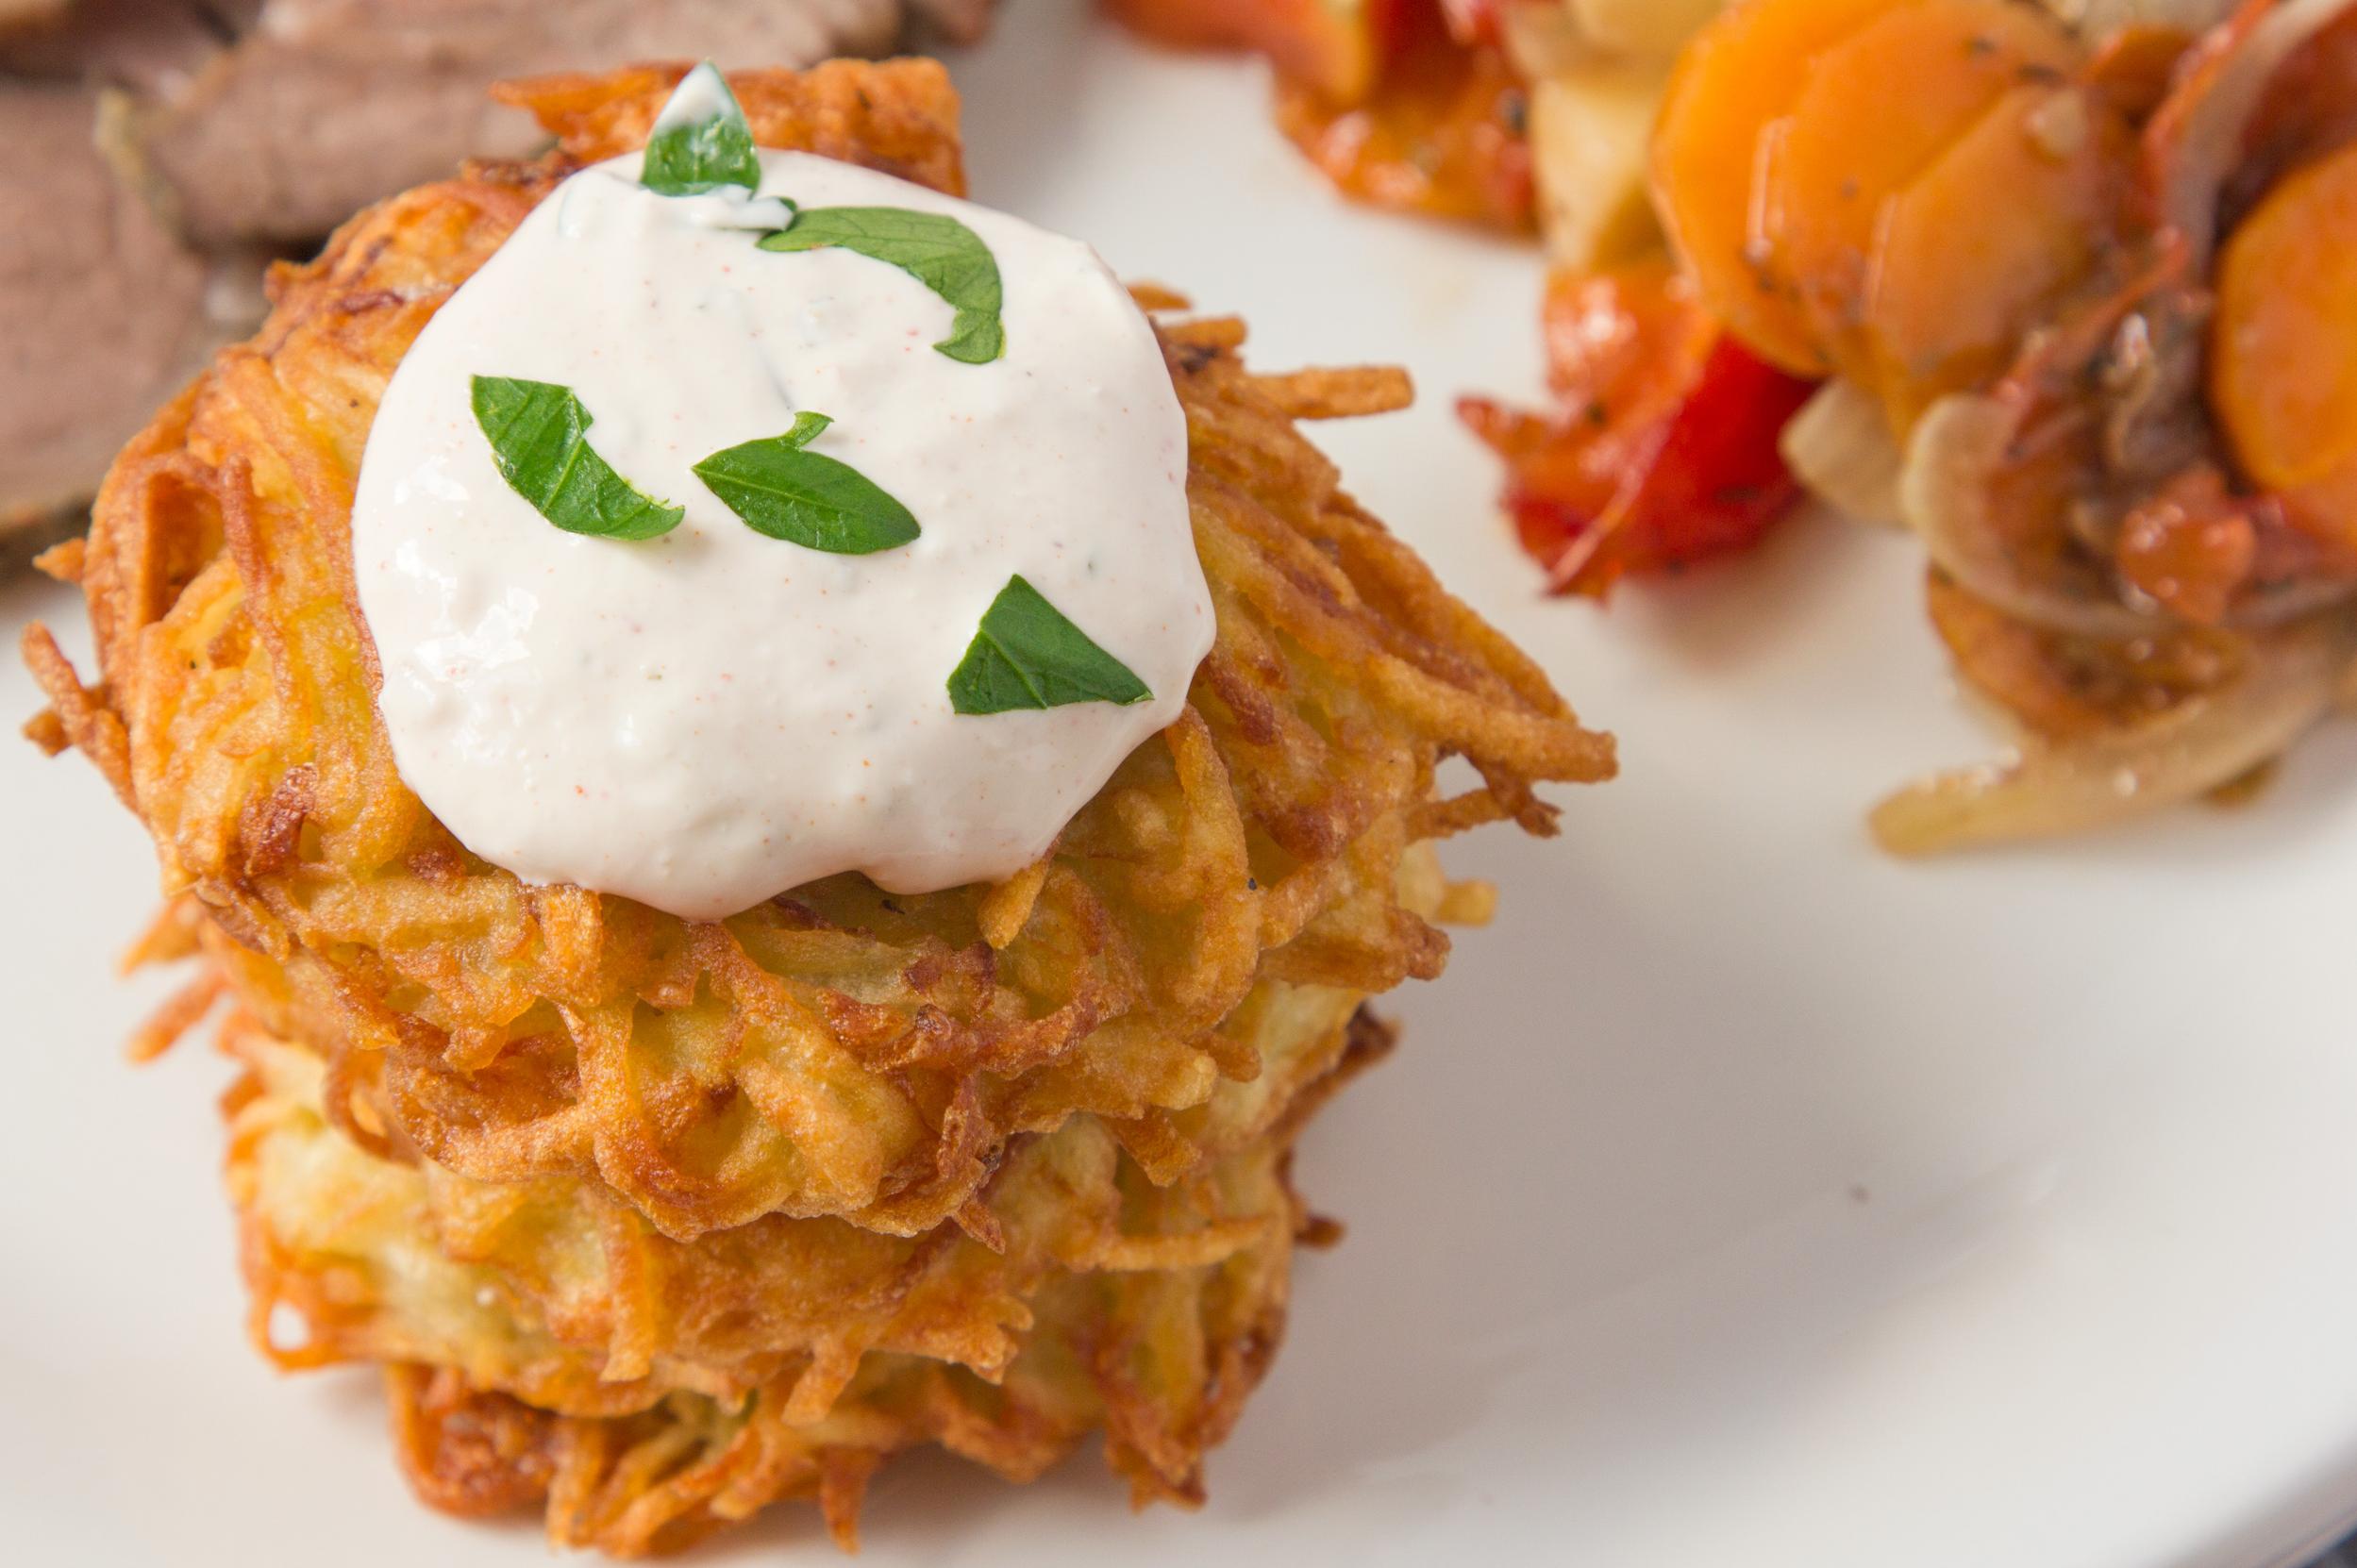  The golden brown hue is the beauty of perfectly fried latkes.